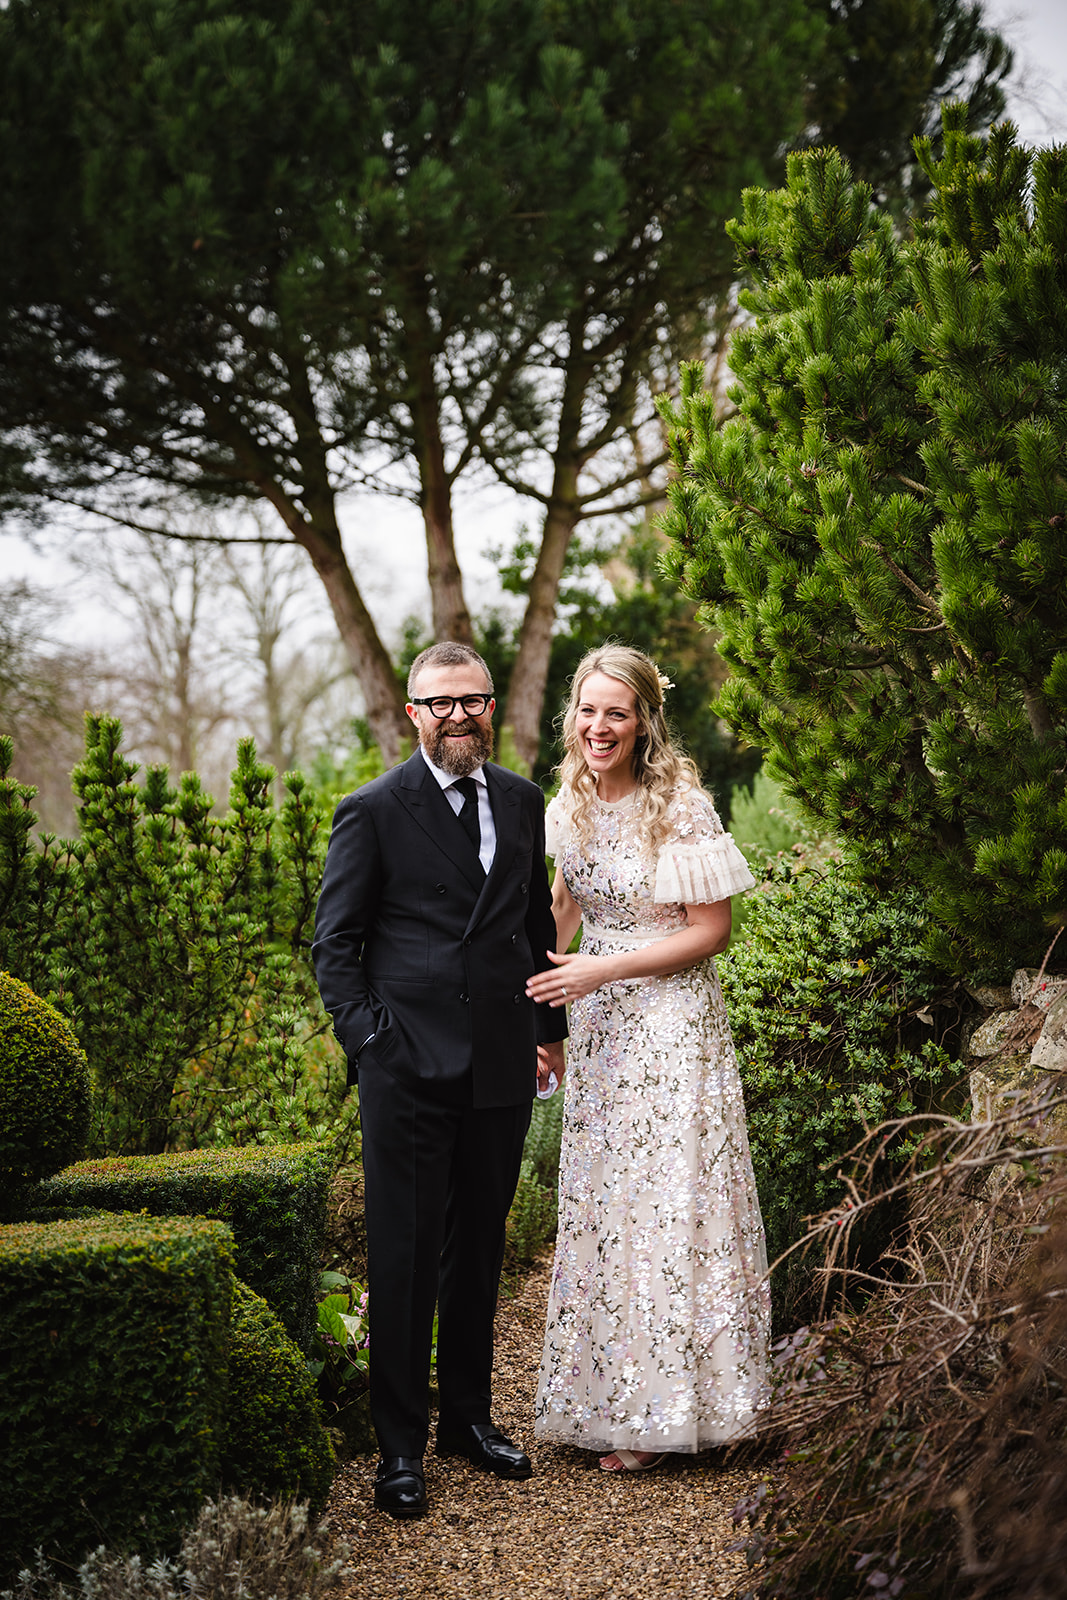 Bride and groom in the gardens at hambleton hall laughing